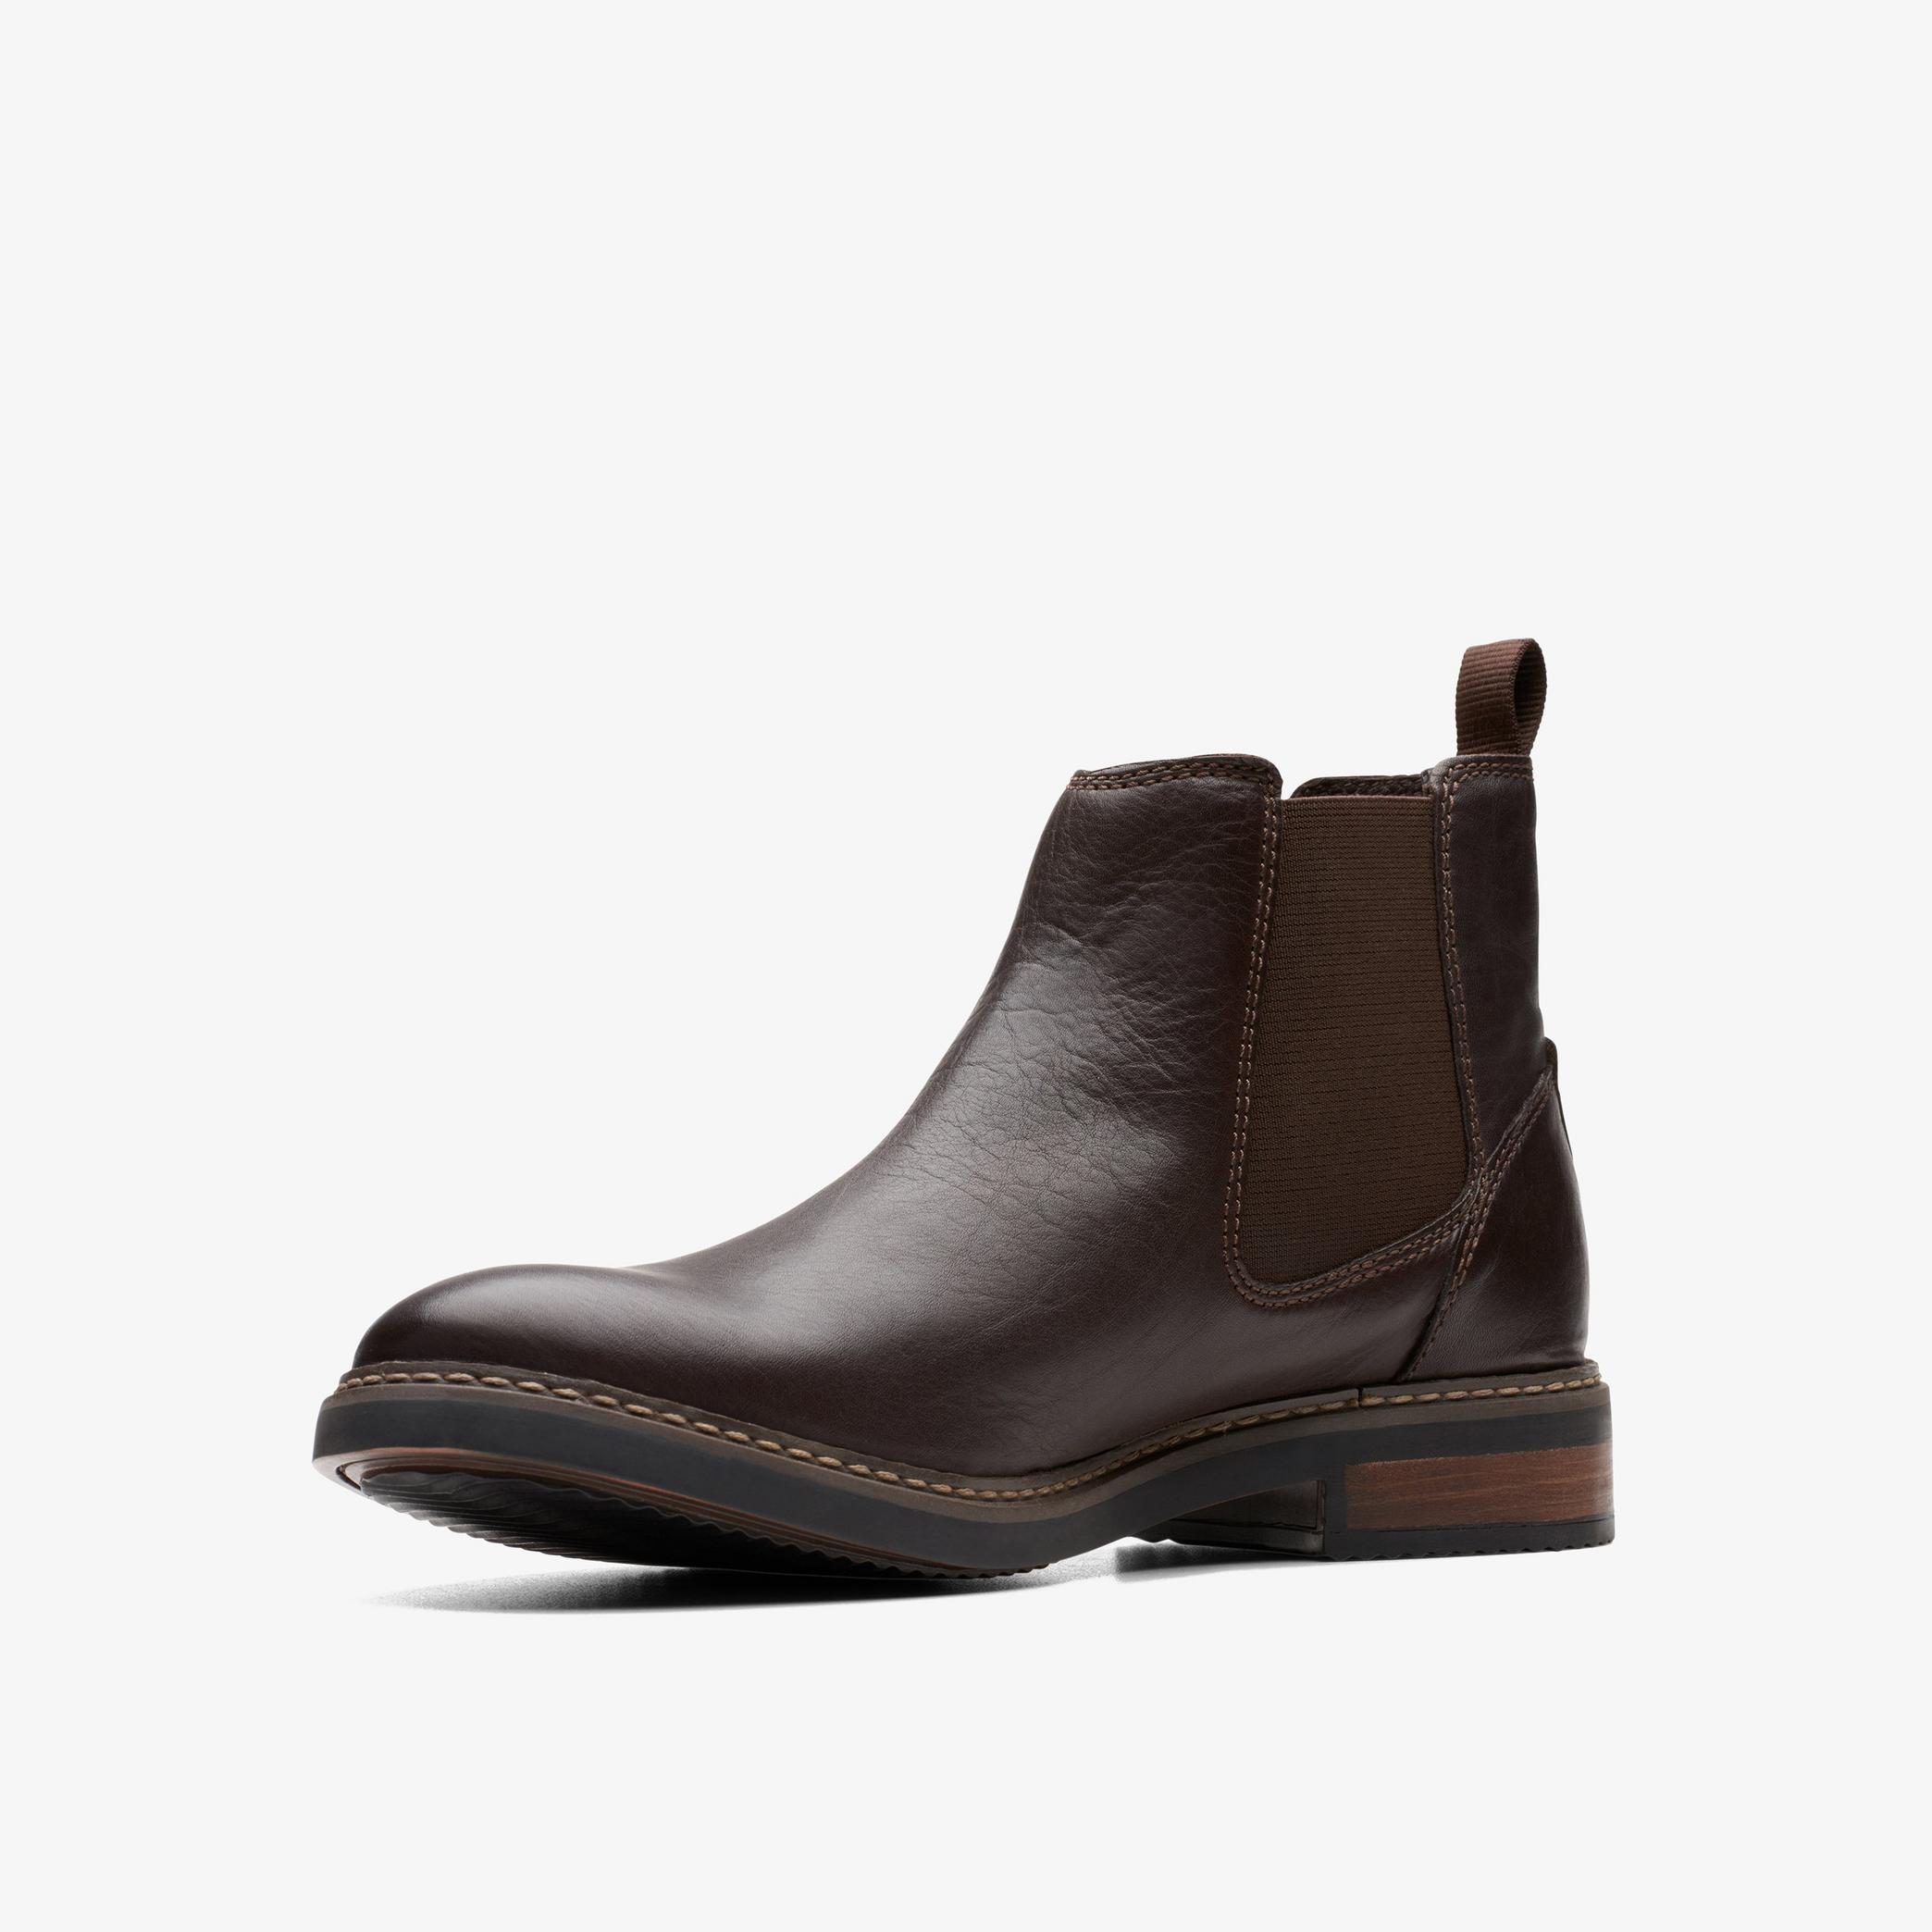 Mens Blackford Top Brown Chelsea Boots | Clarks Outlet